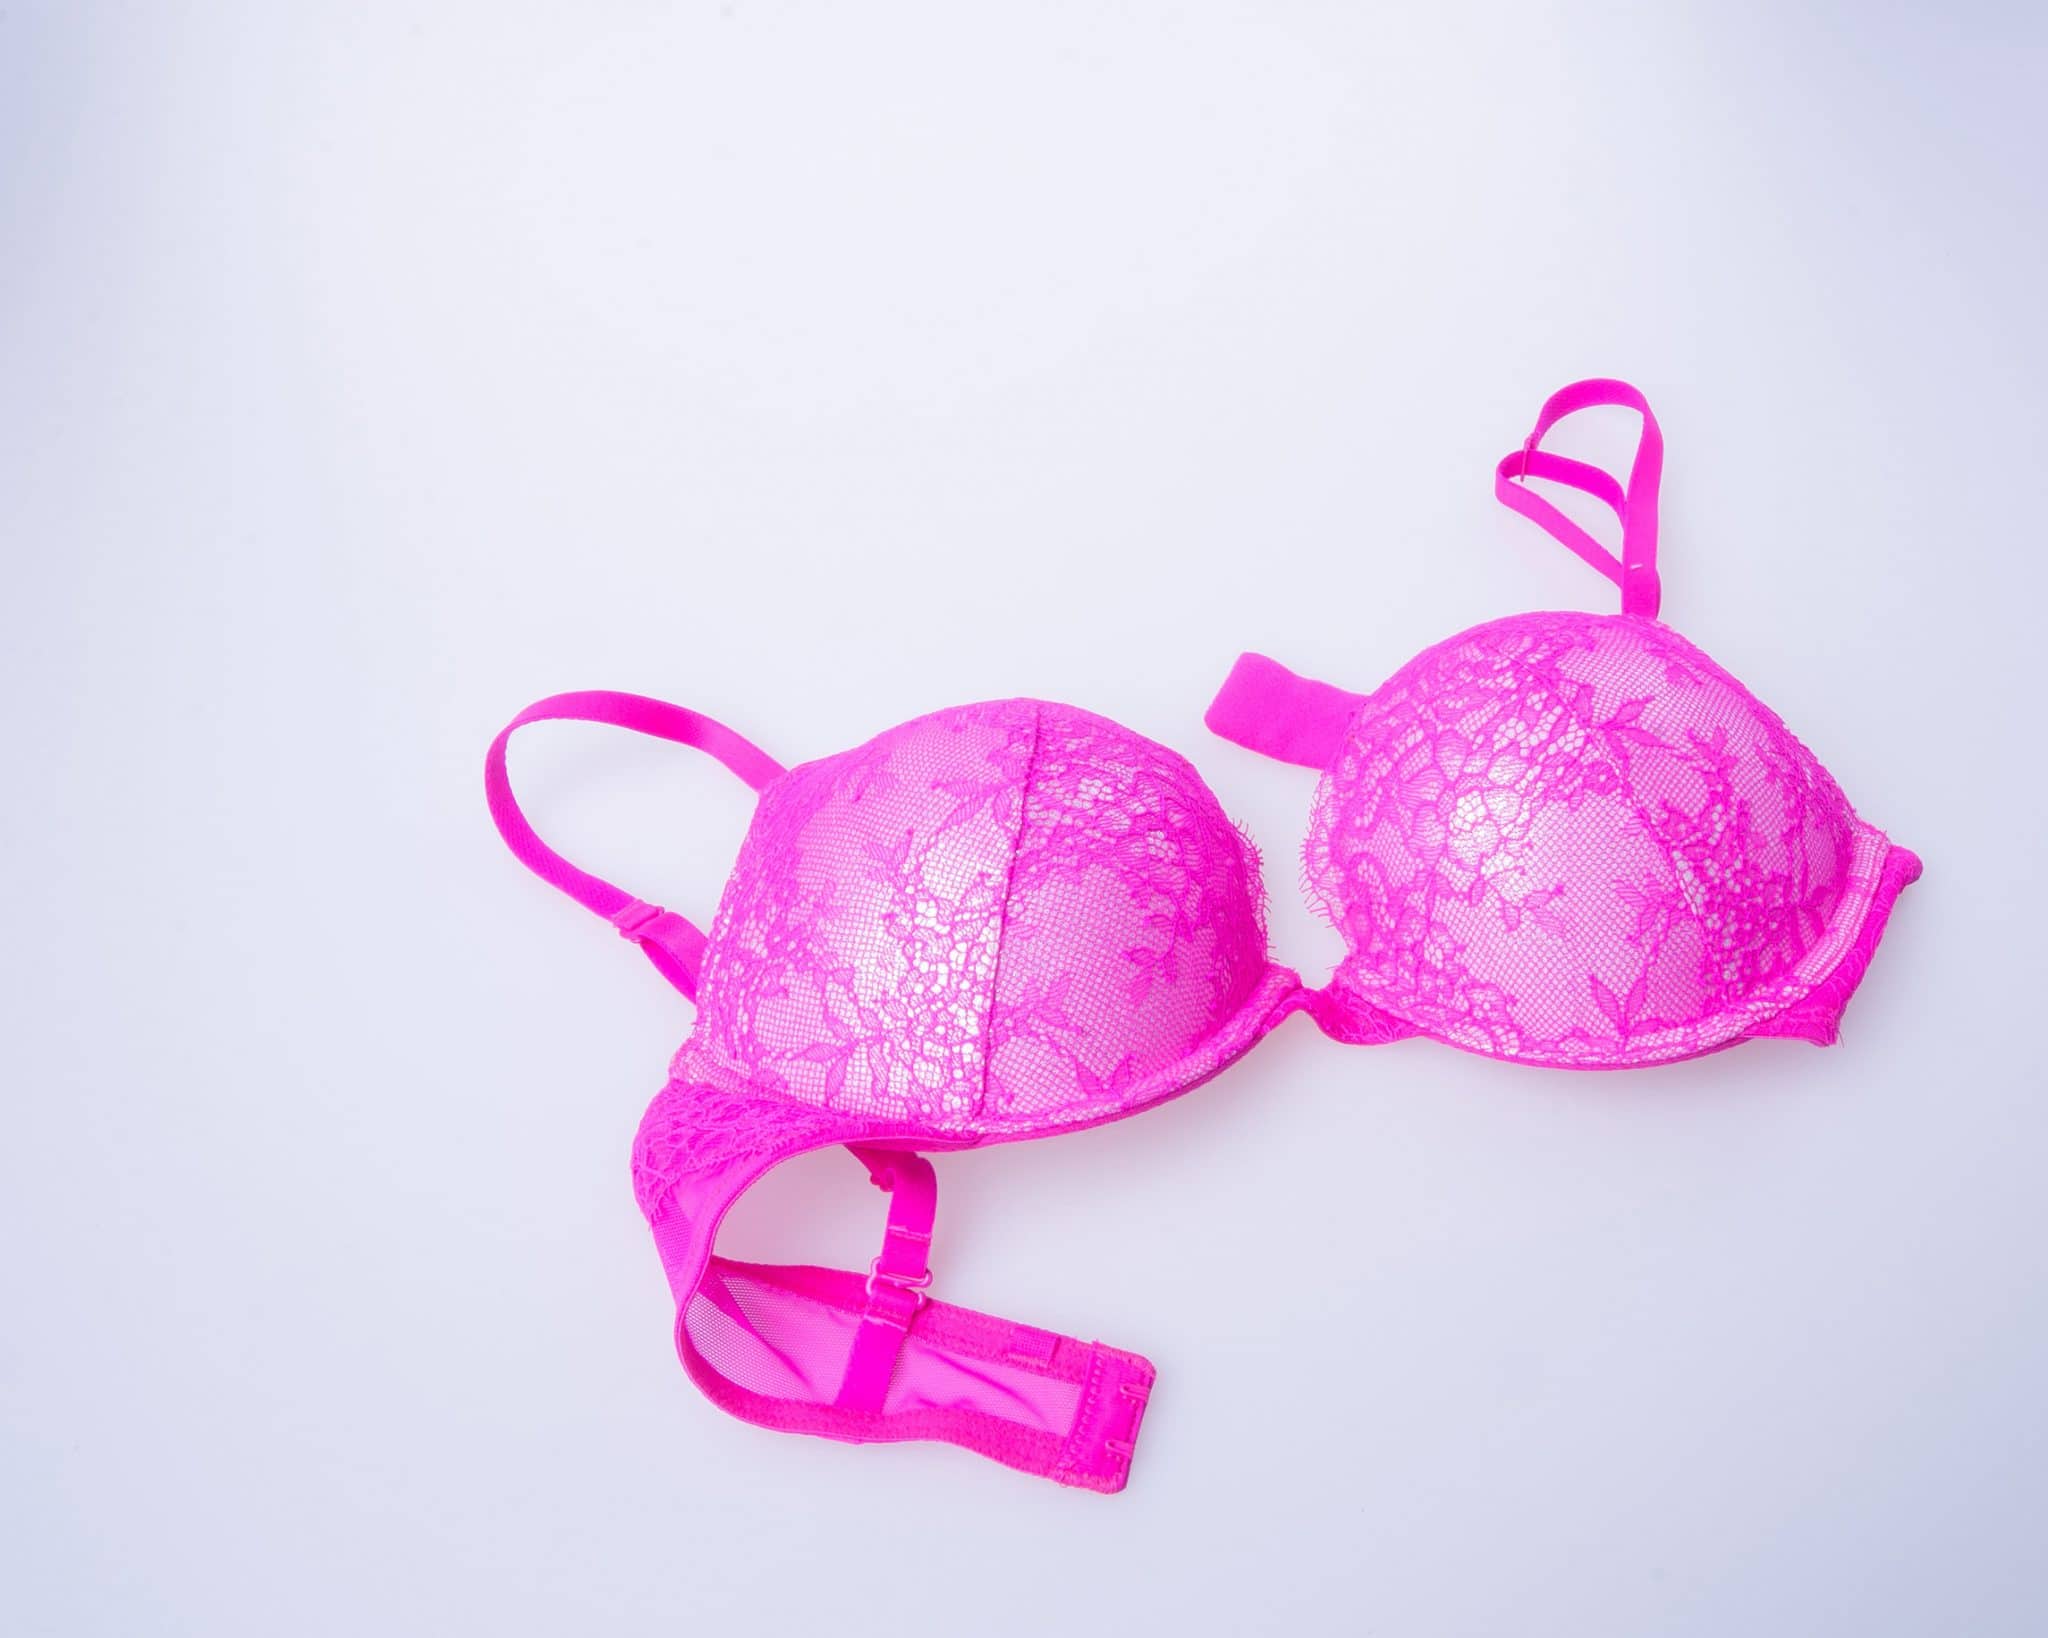 Why do people say it's bad to wear a bra at night?